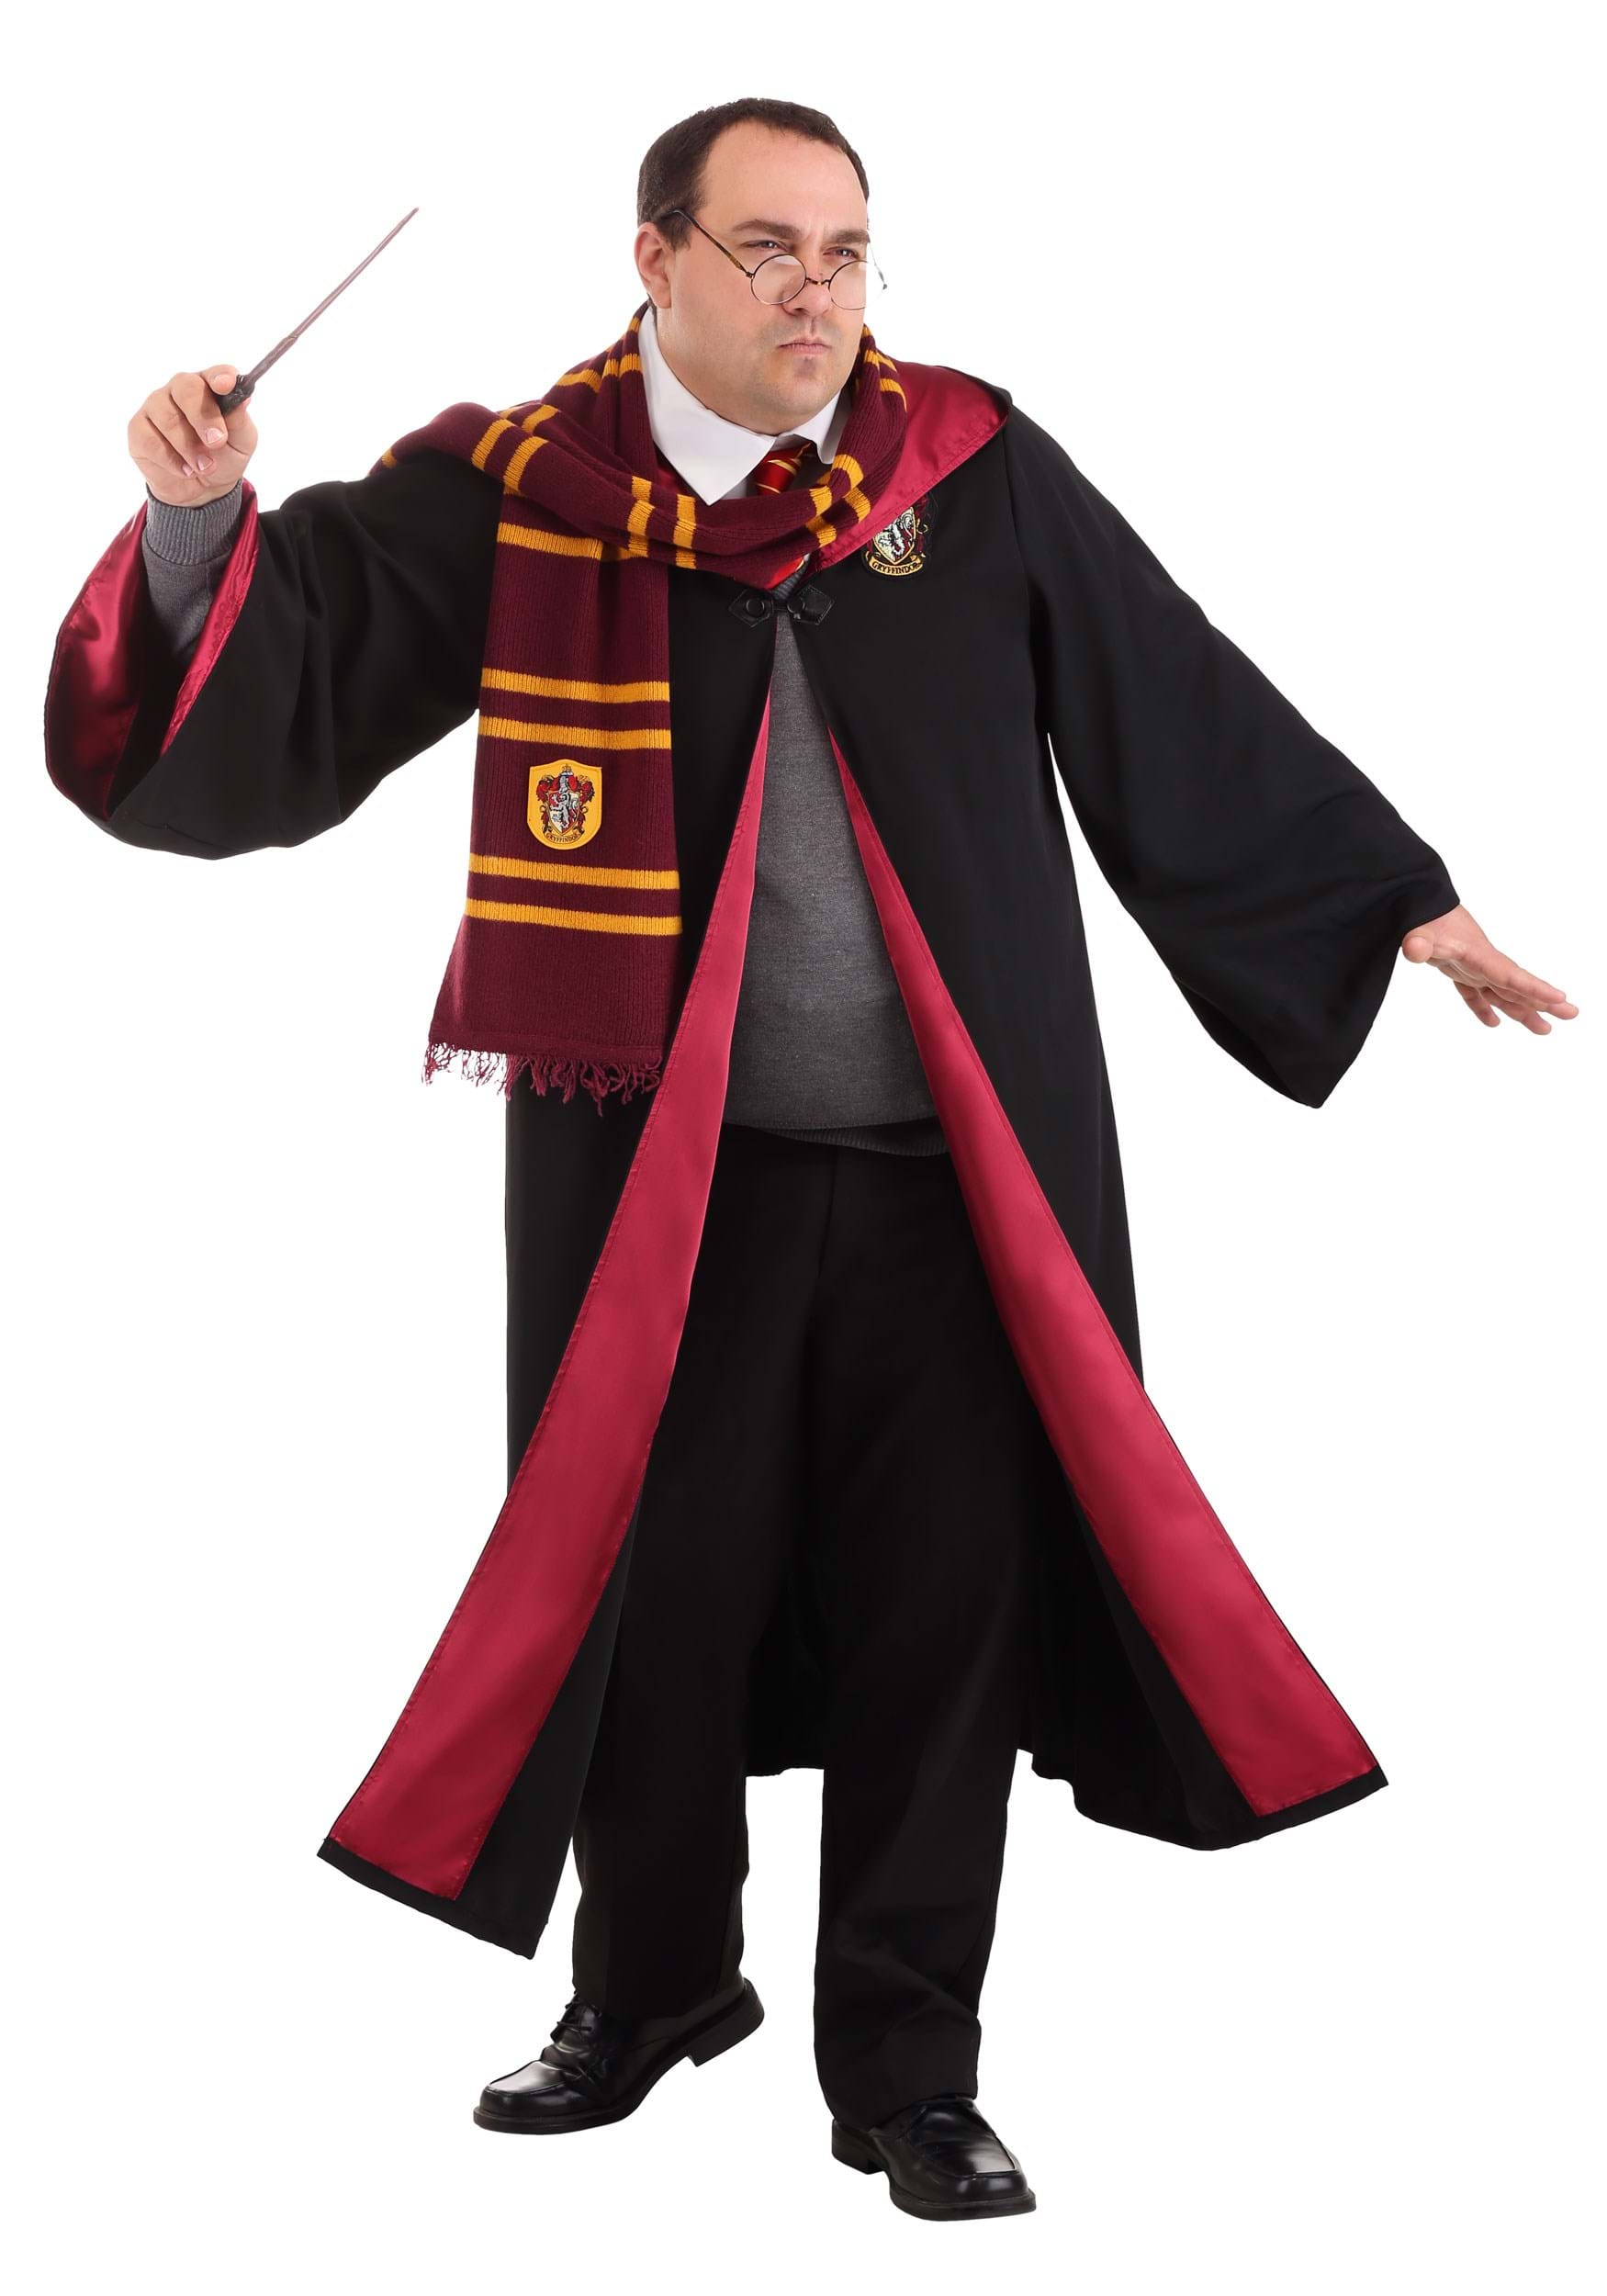 https://images.halloween.com/products/64163/1-1/plus-size-deluxe-harry-potter-costume-upd.jpg